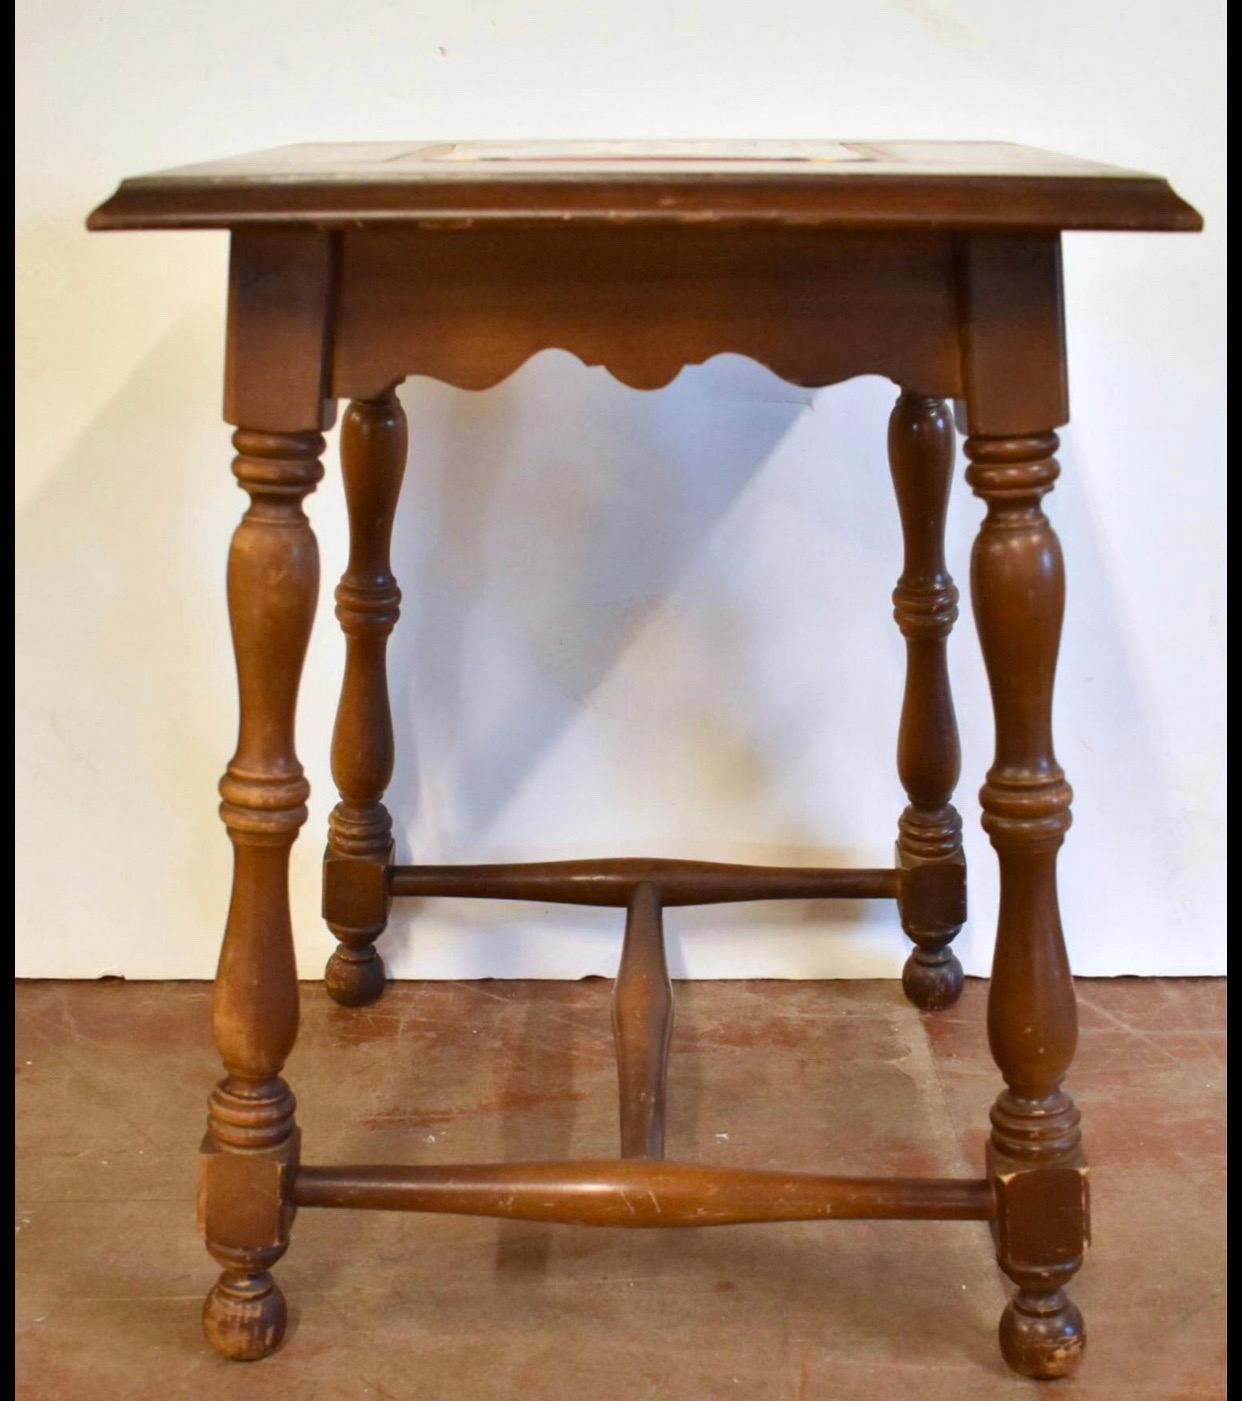 Antique California Tile Top Table From Northwest Company 1940s. Walnut Table Features Single Insert Tile
Measures 21 in Tall By 16 in wide.